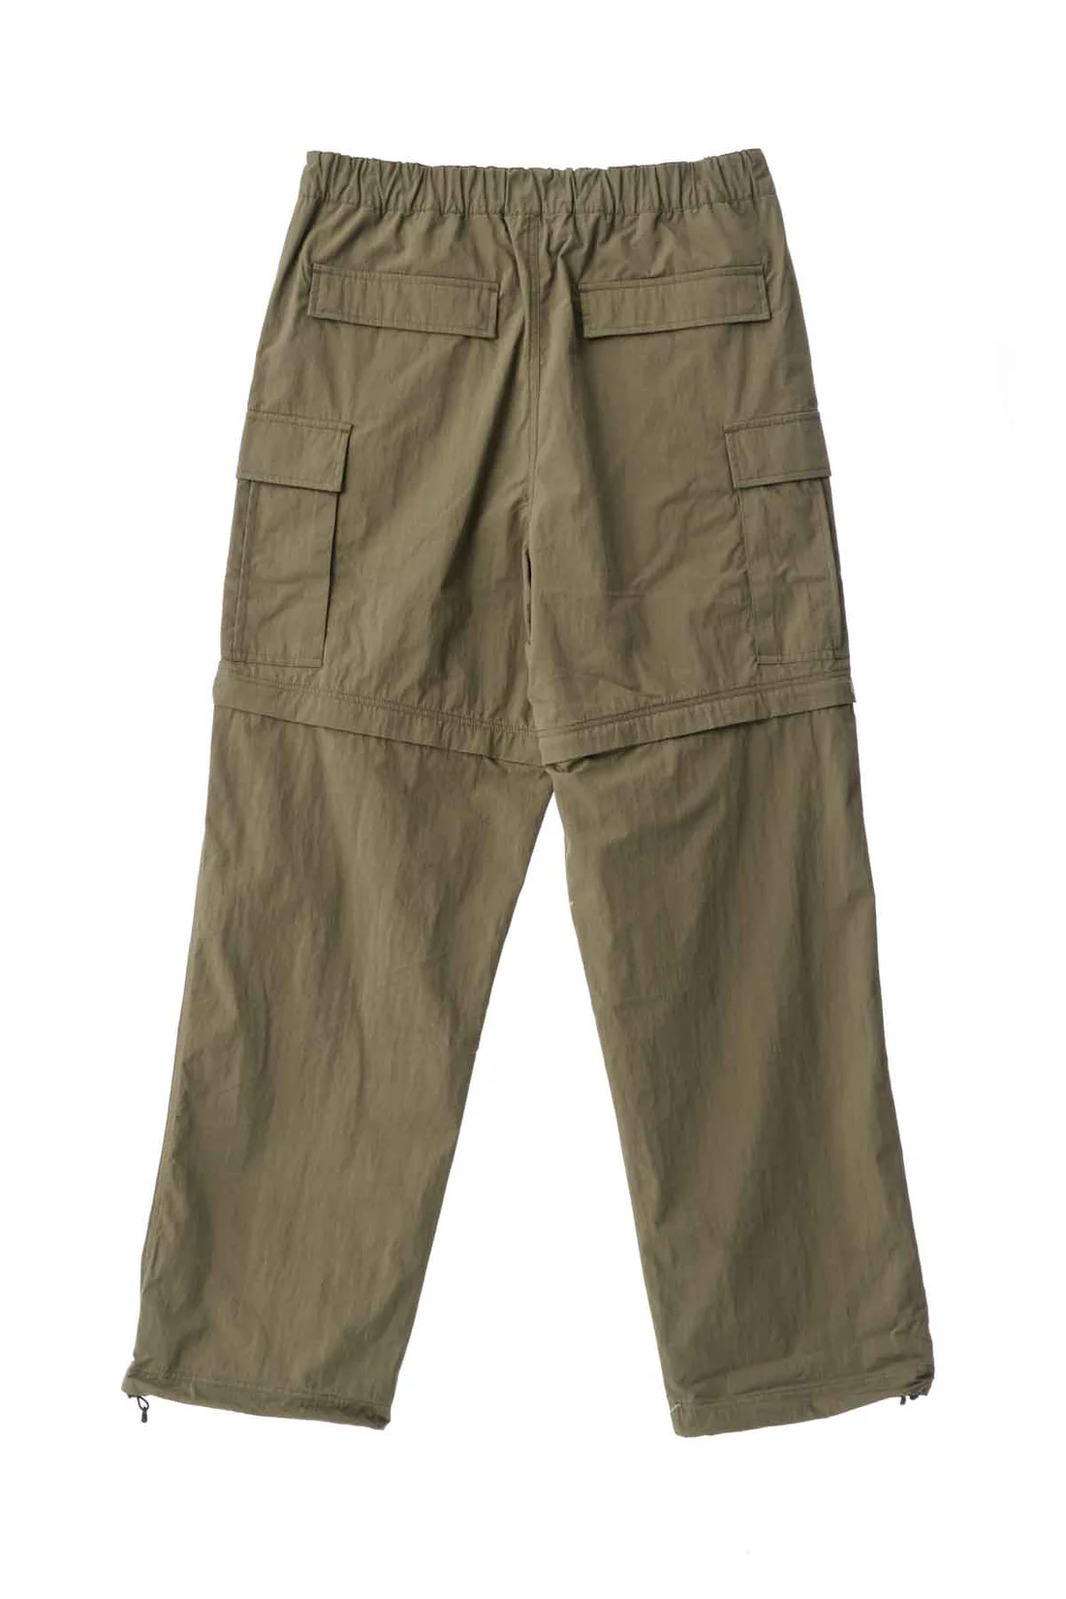 XLARGE Pants NYCO Cargo Convertible Army